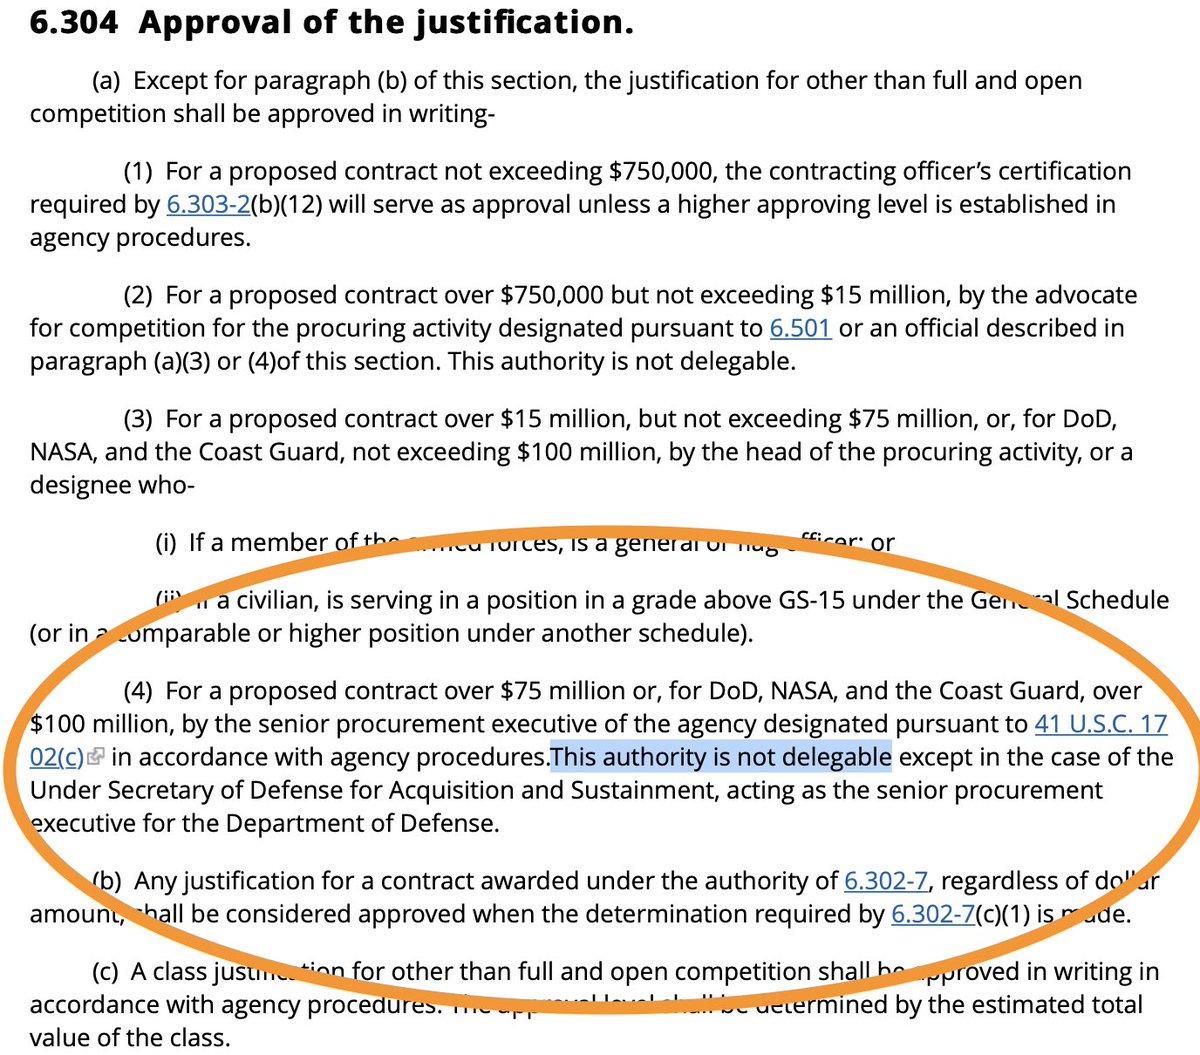 While chatting with “along” and/or “awright” at HHS, it would be important to ask them *who* authorized the contract, and to confirm that this person had authority to do so. After all, that authority cannot be delegated under federal law.  https://www.acquisition.gov/far/part-6#FAR_6_304